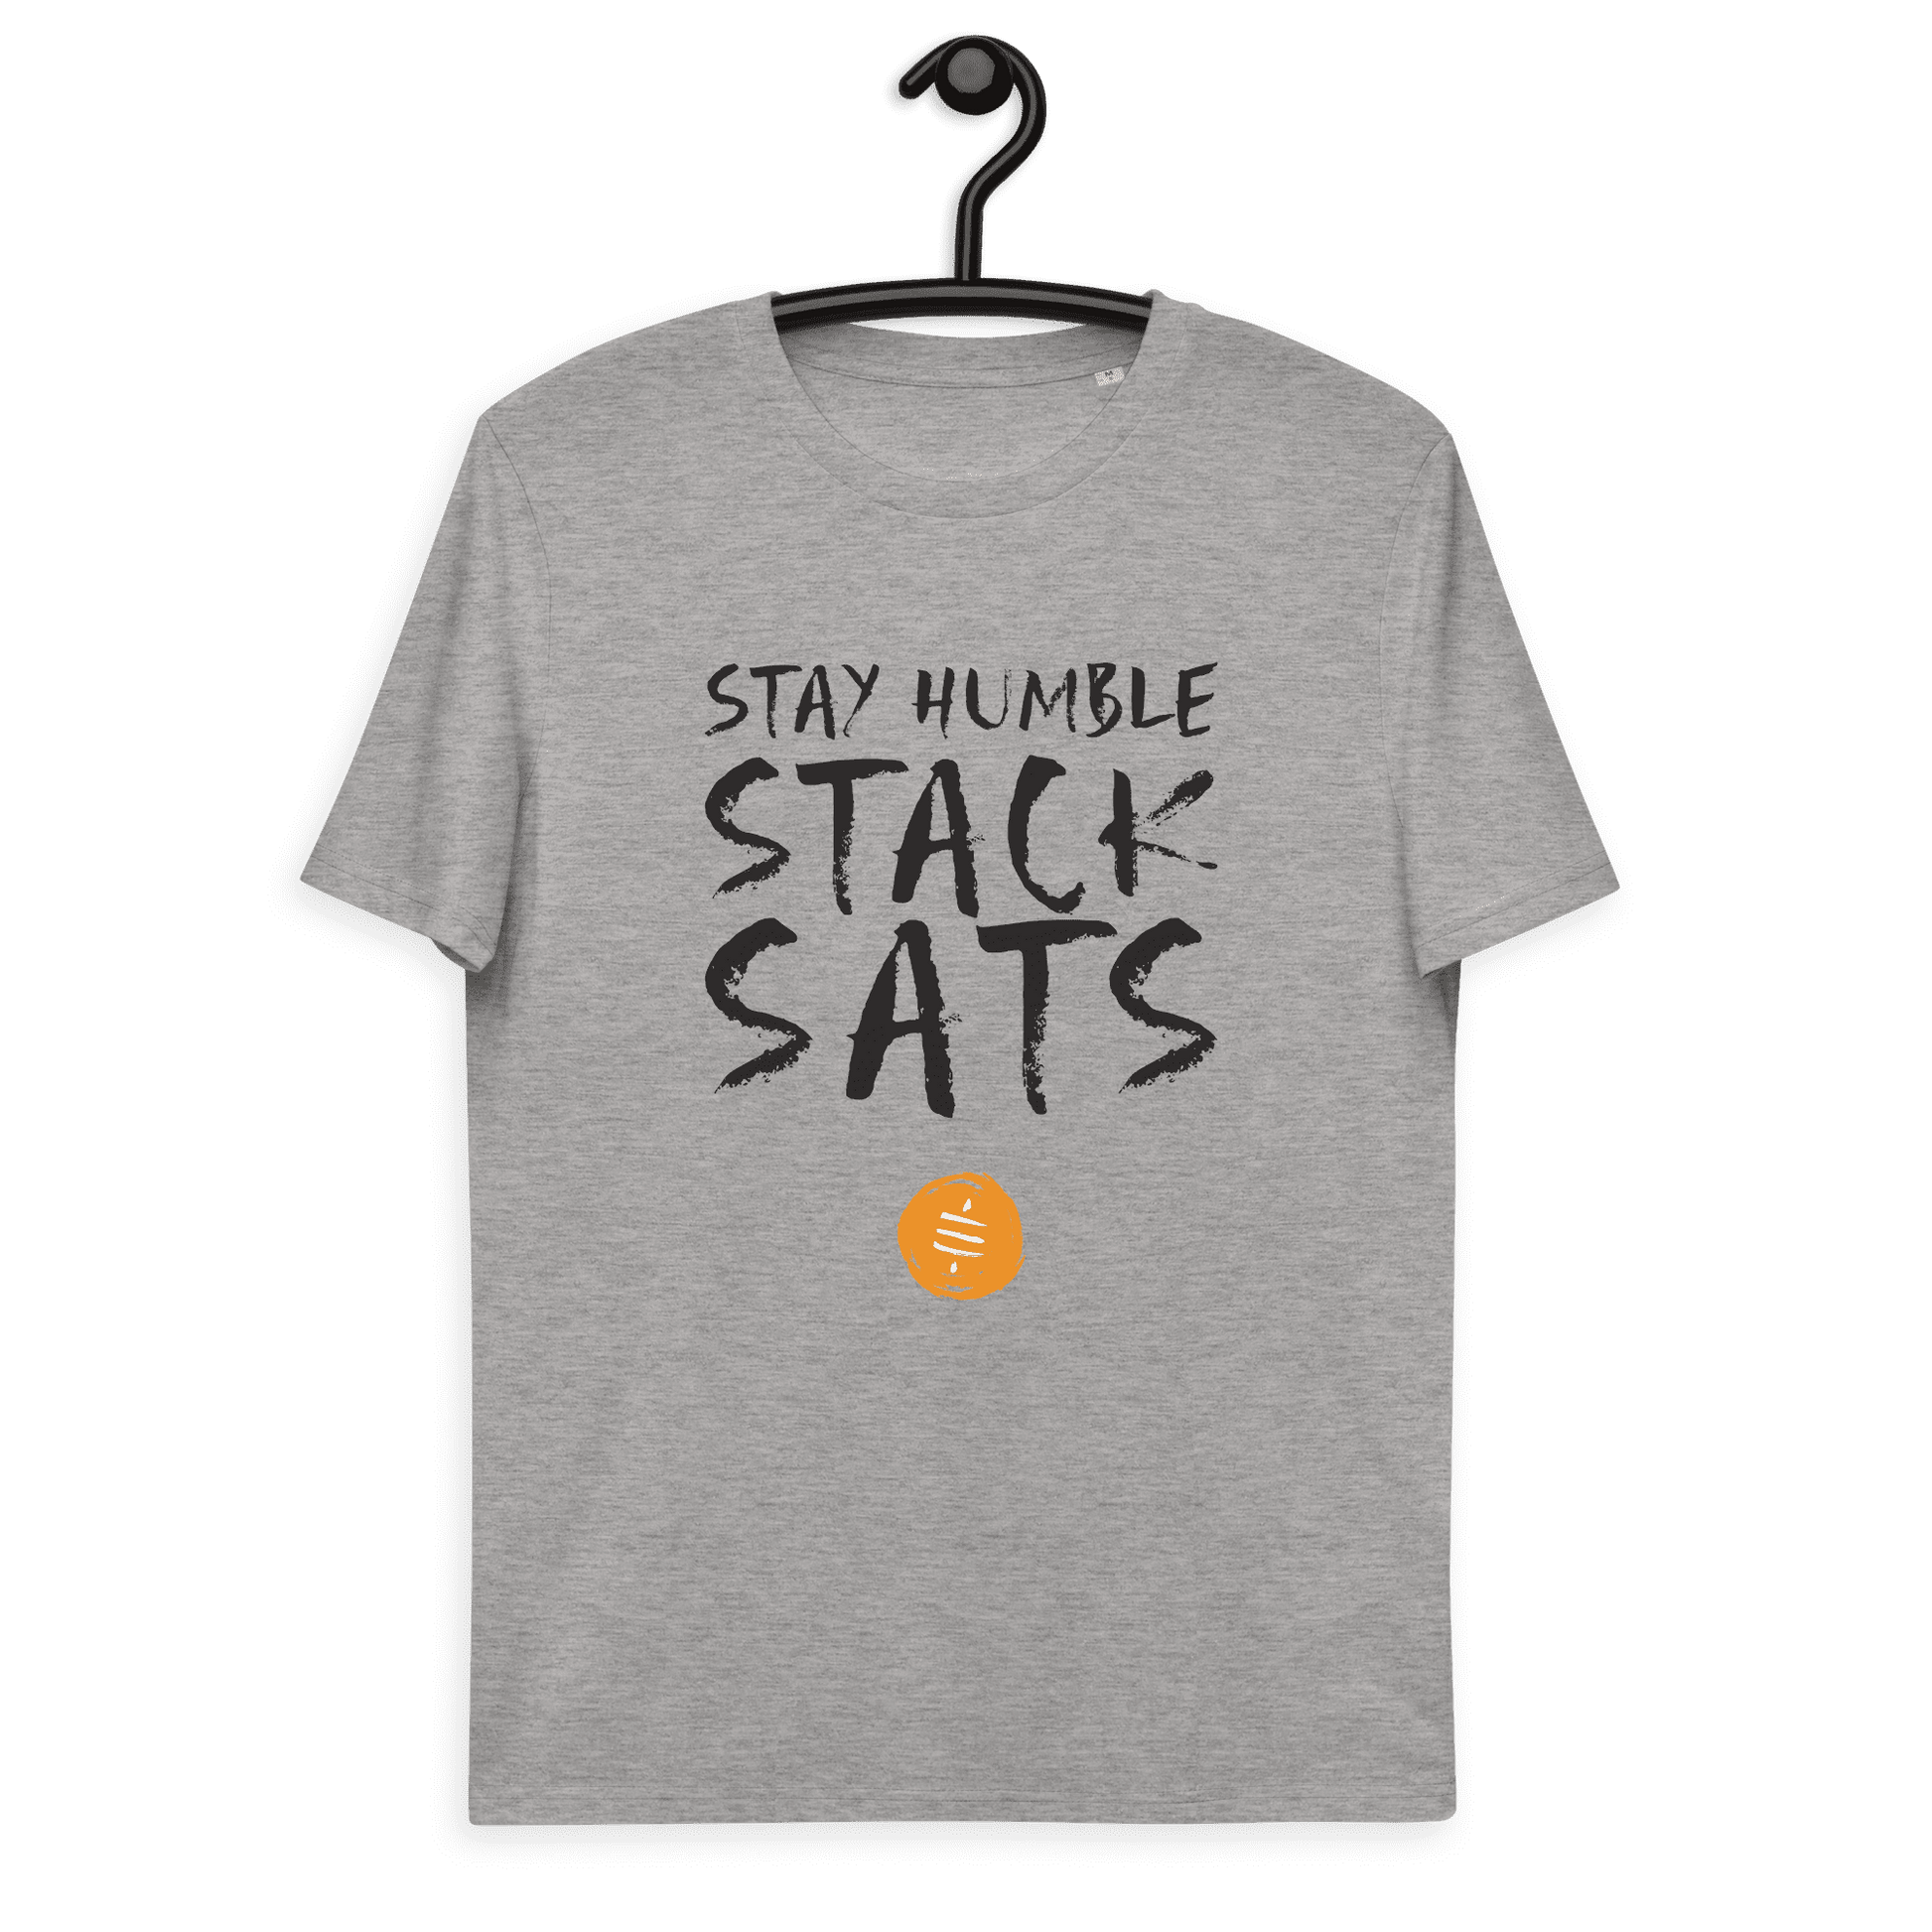 Front view of a heather grey colored bitcoin t-shirt.